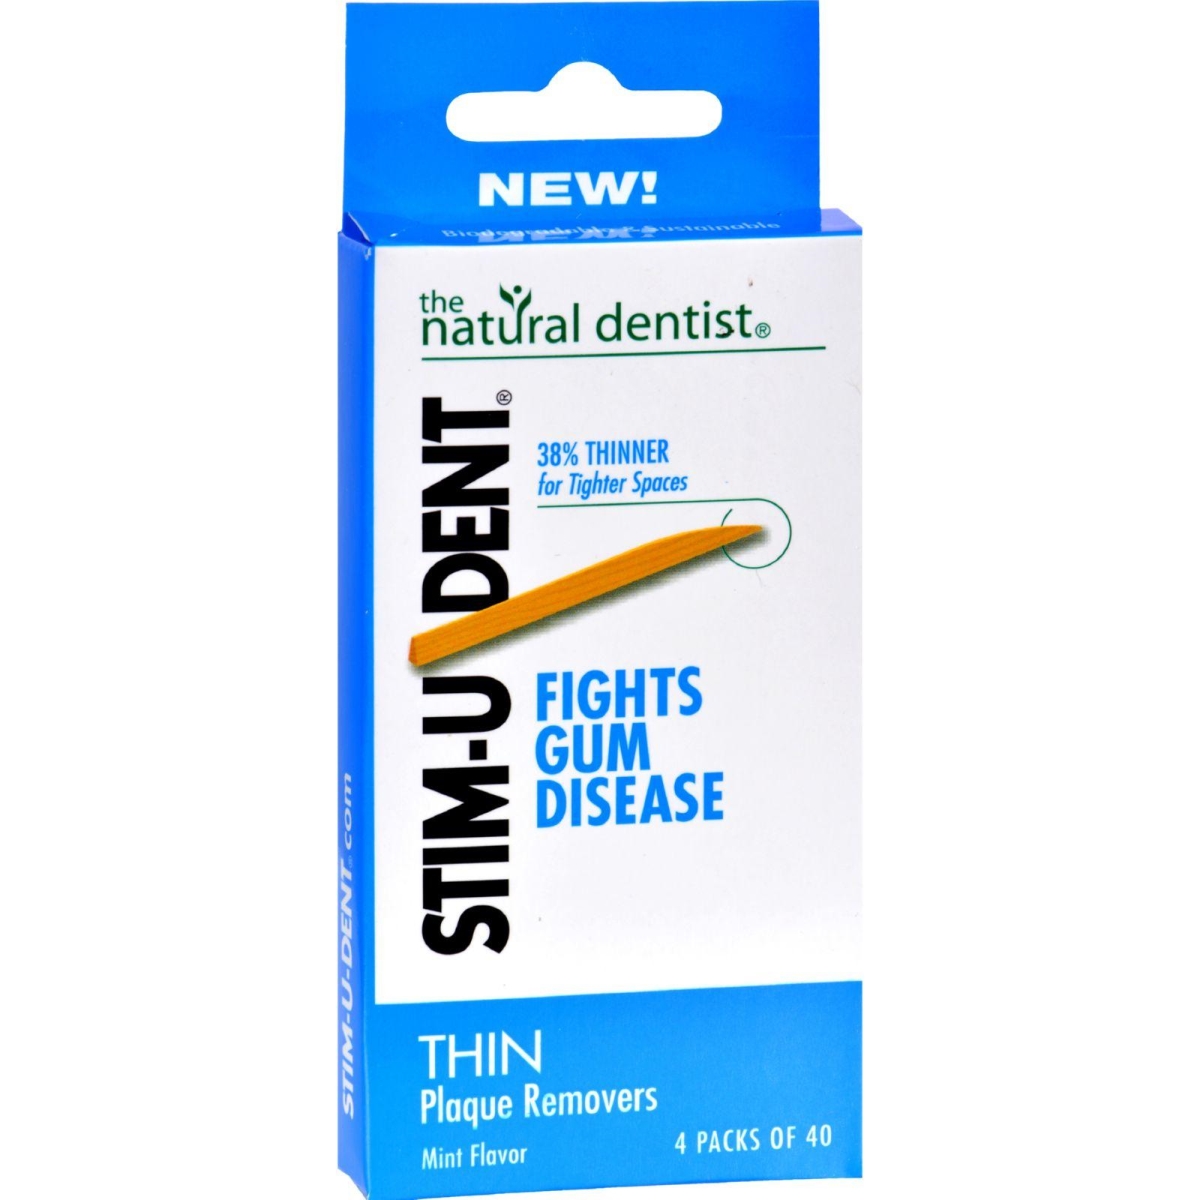 Hg1165539 Stim-u-dent Thin Plaque Removers Mint, Case Of 6 - Pack Of 4